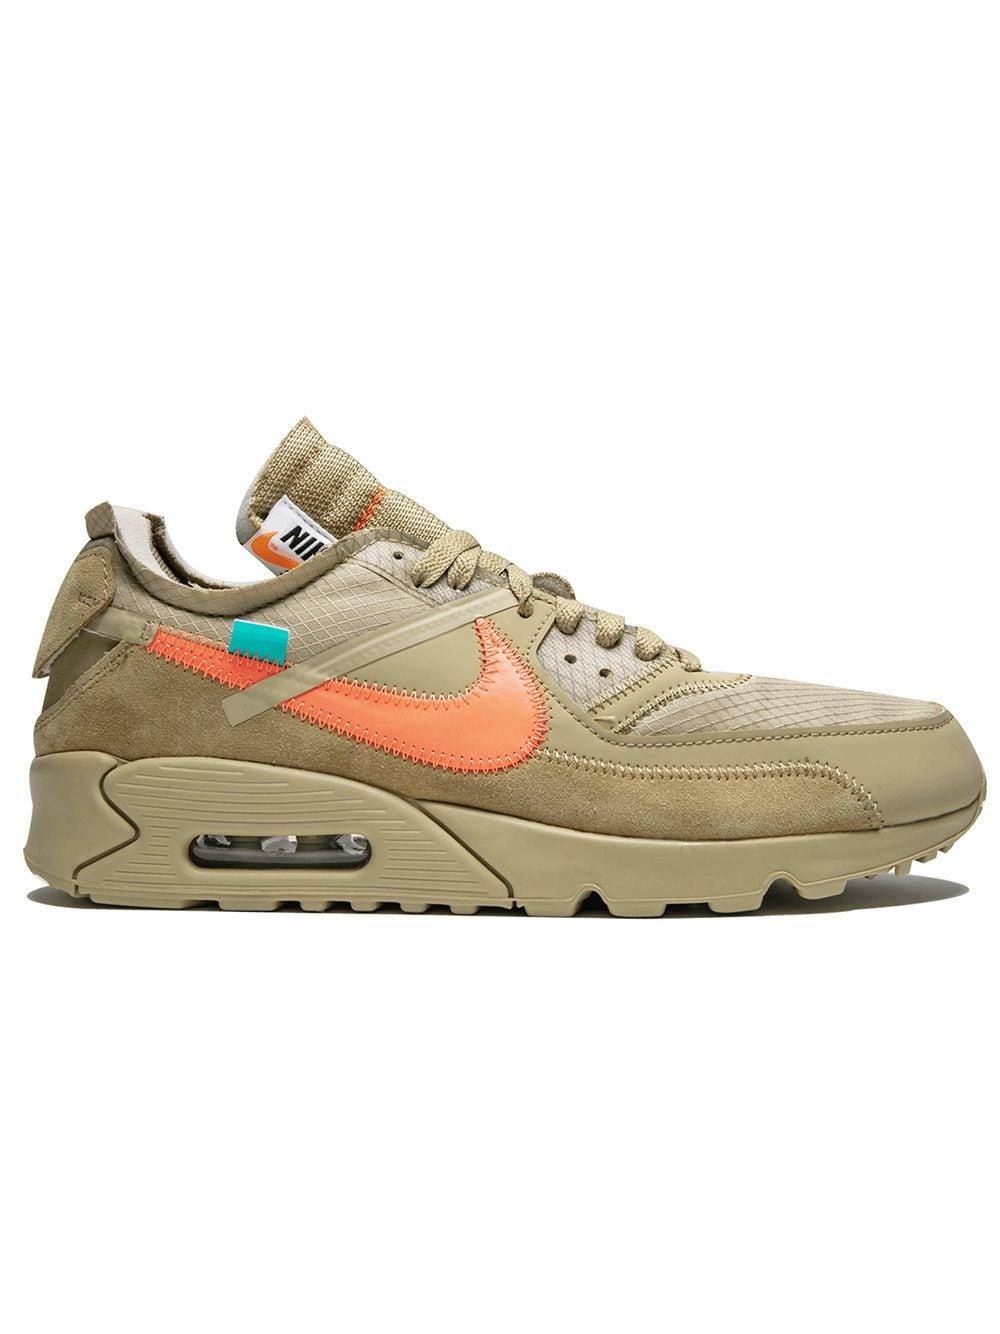 NIKE X OFF-WHITE "the 10th" Air Max 90 Sneakers for Men | Lyst